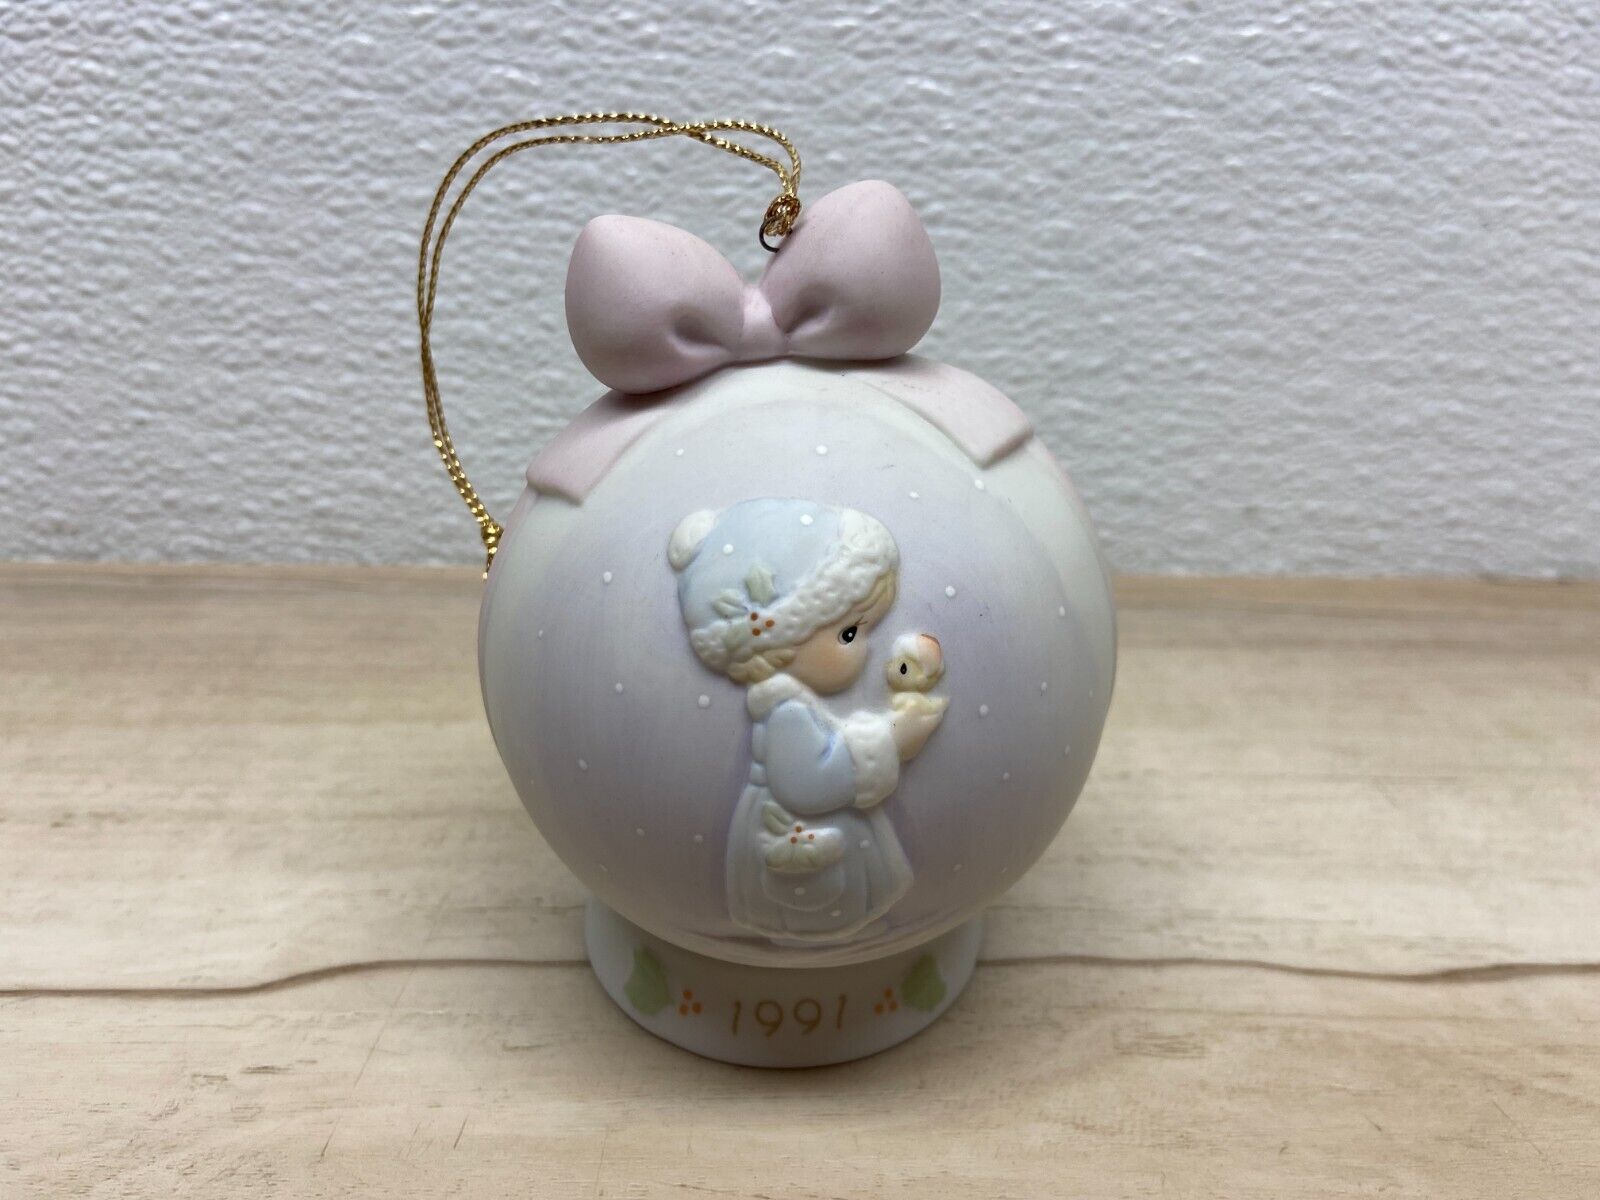 Vtg 1991 Enesco Precious Moments May Your Christmas Be Merry Ornament Figurine